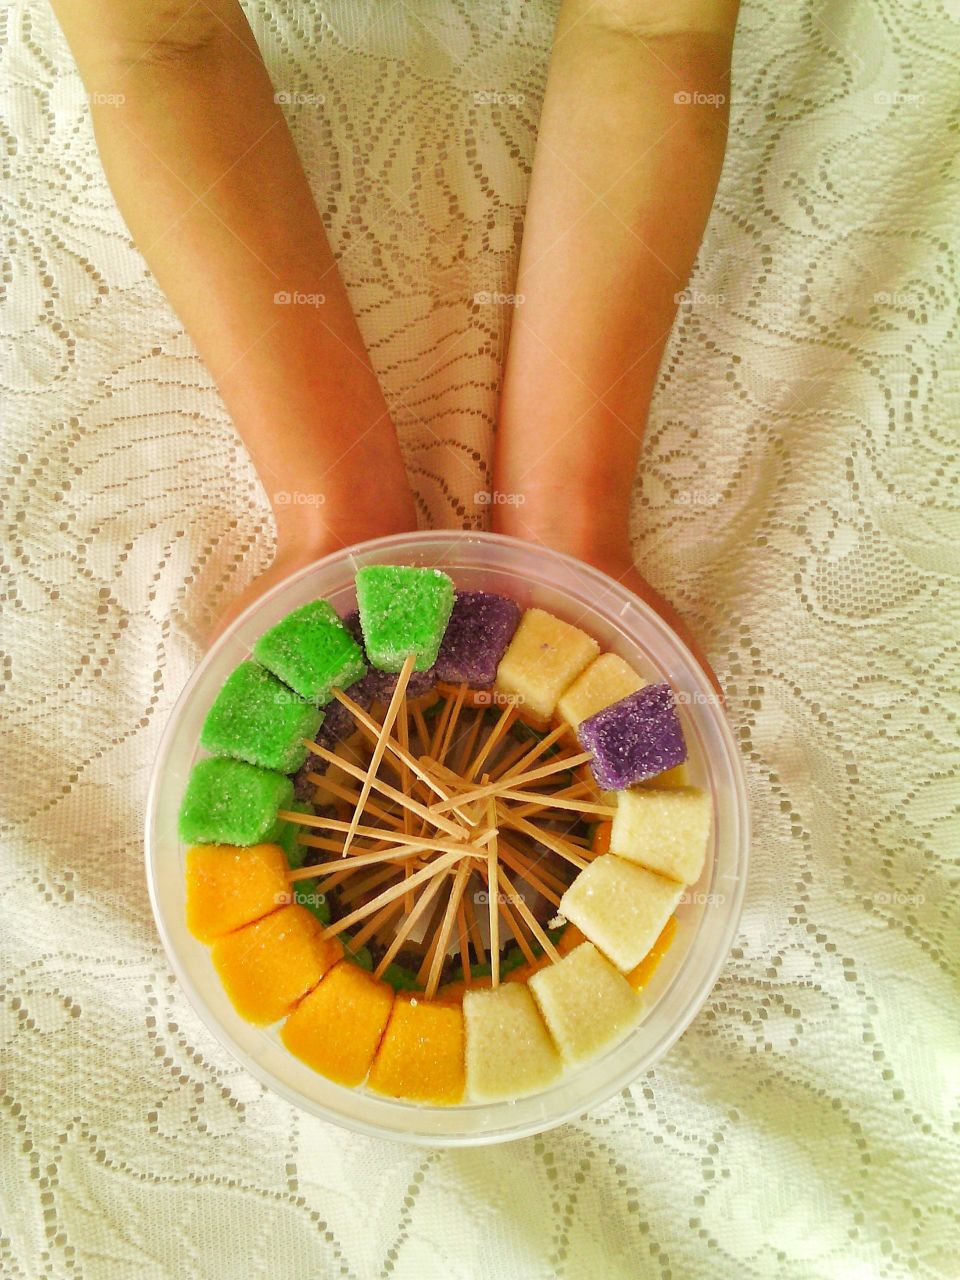 Colorful pastillas -- our native delicacy made of milk